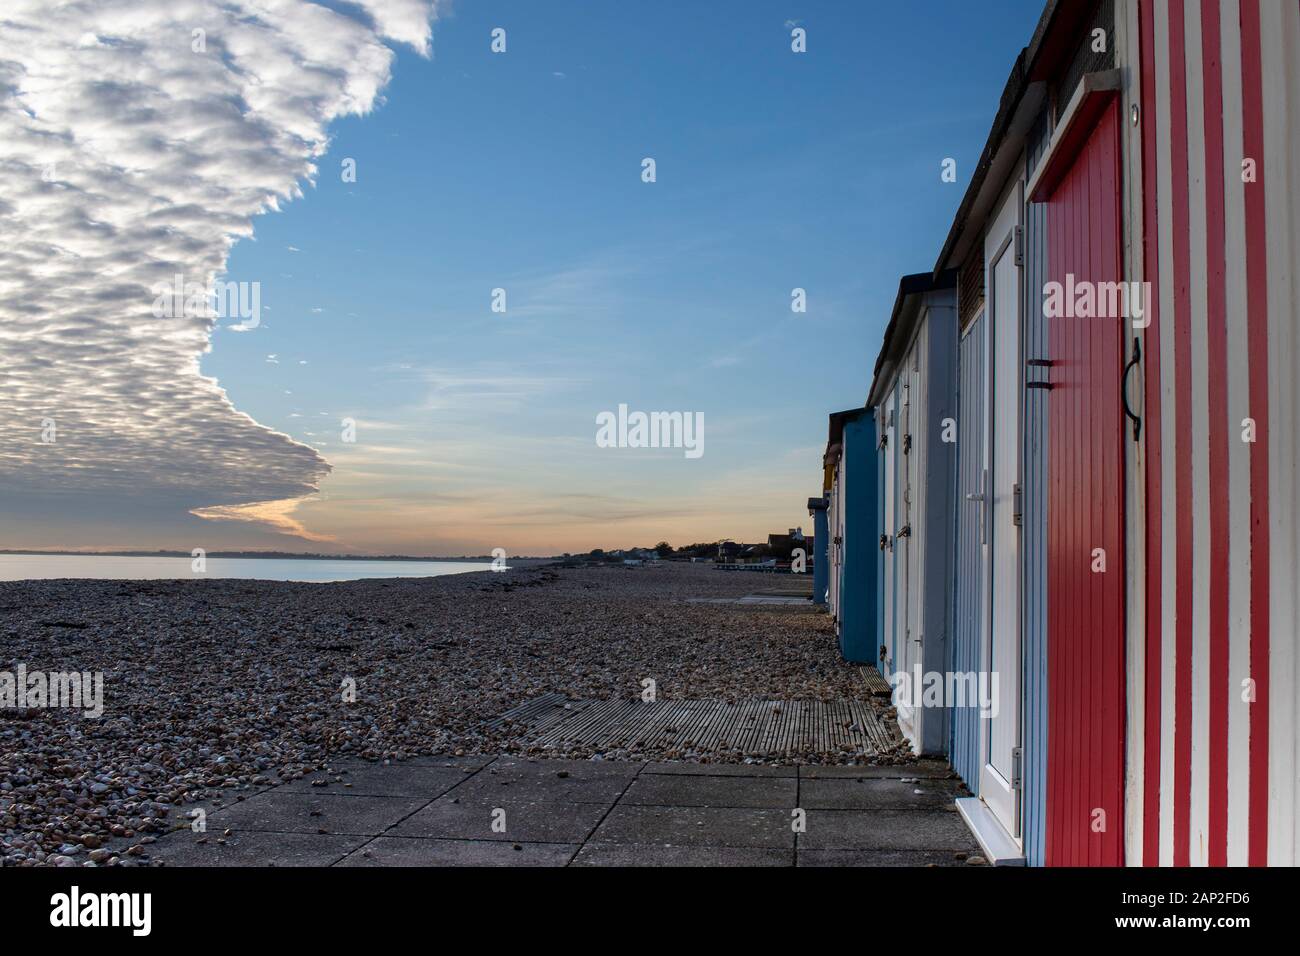 Dramatic cloud formation over the seafront at Bognor Regis with colourful beach huts on the beach and, beautiful colours and reflections of the sea. Stock Photo